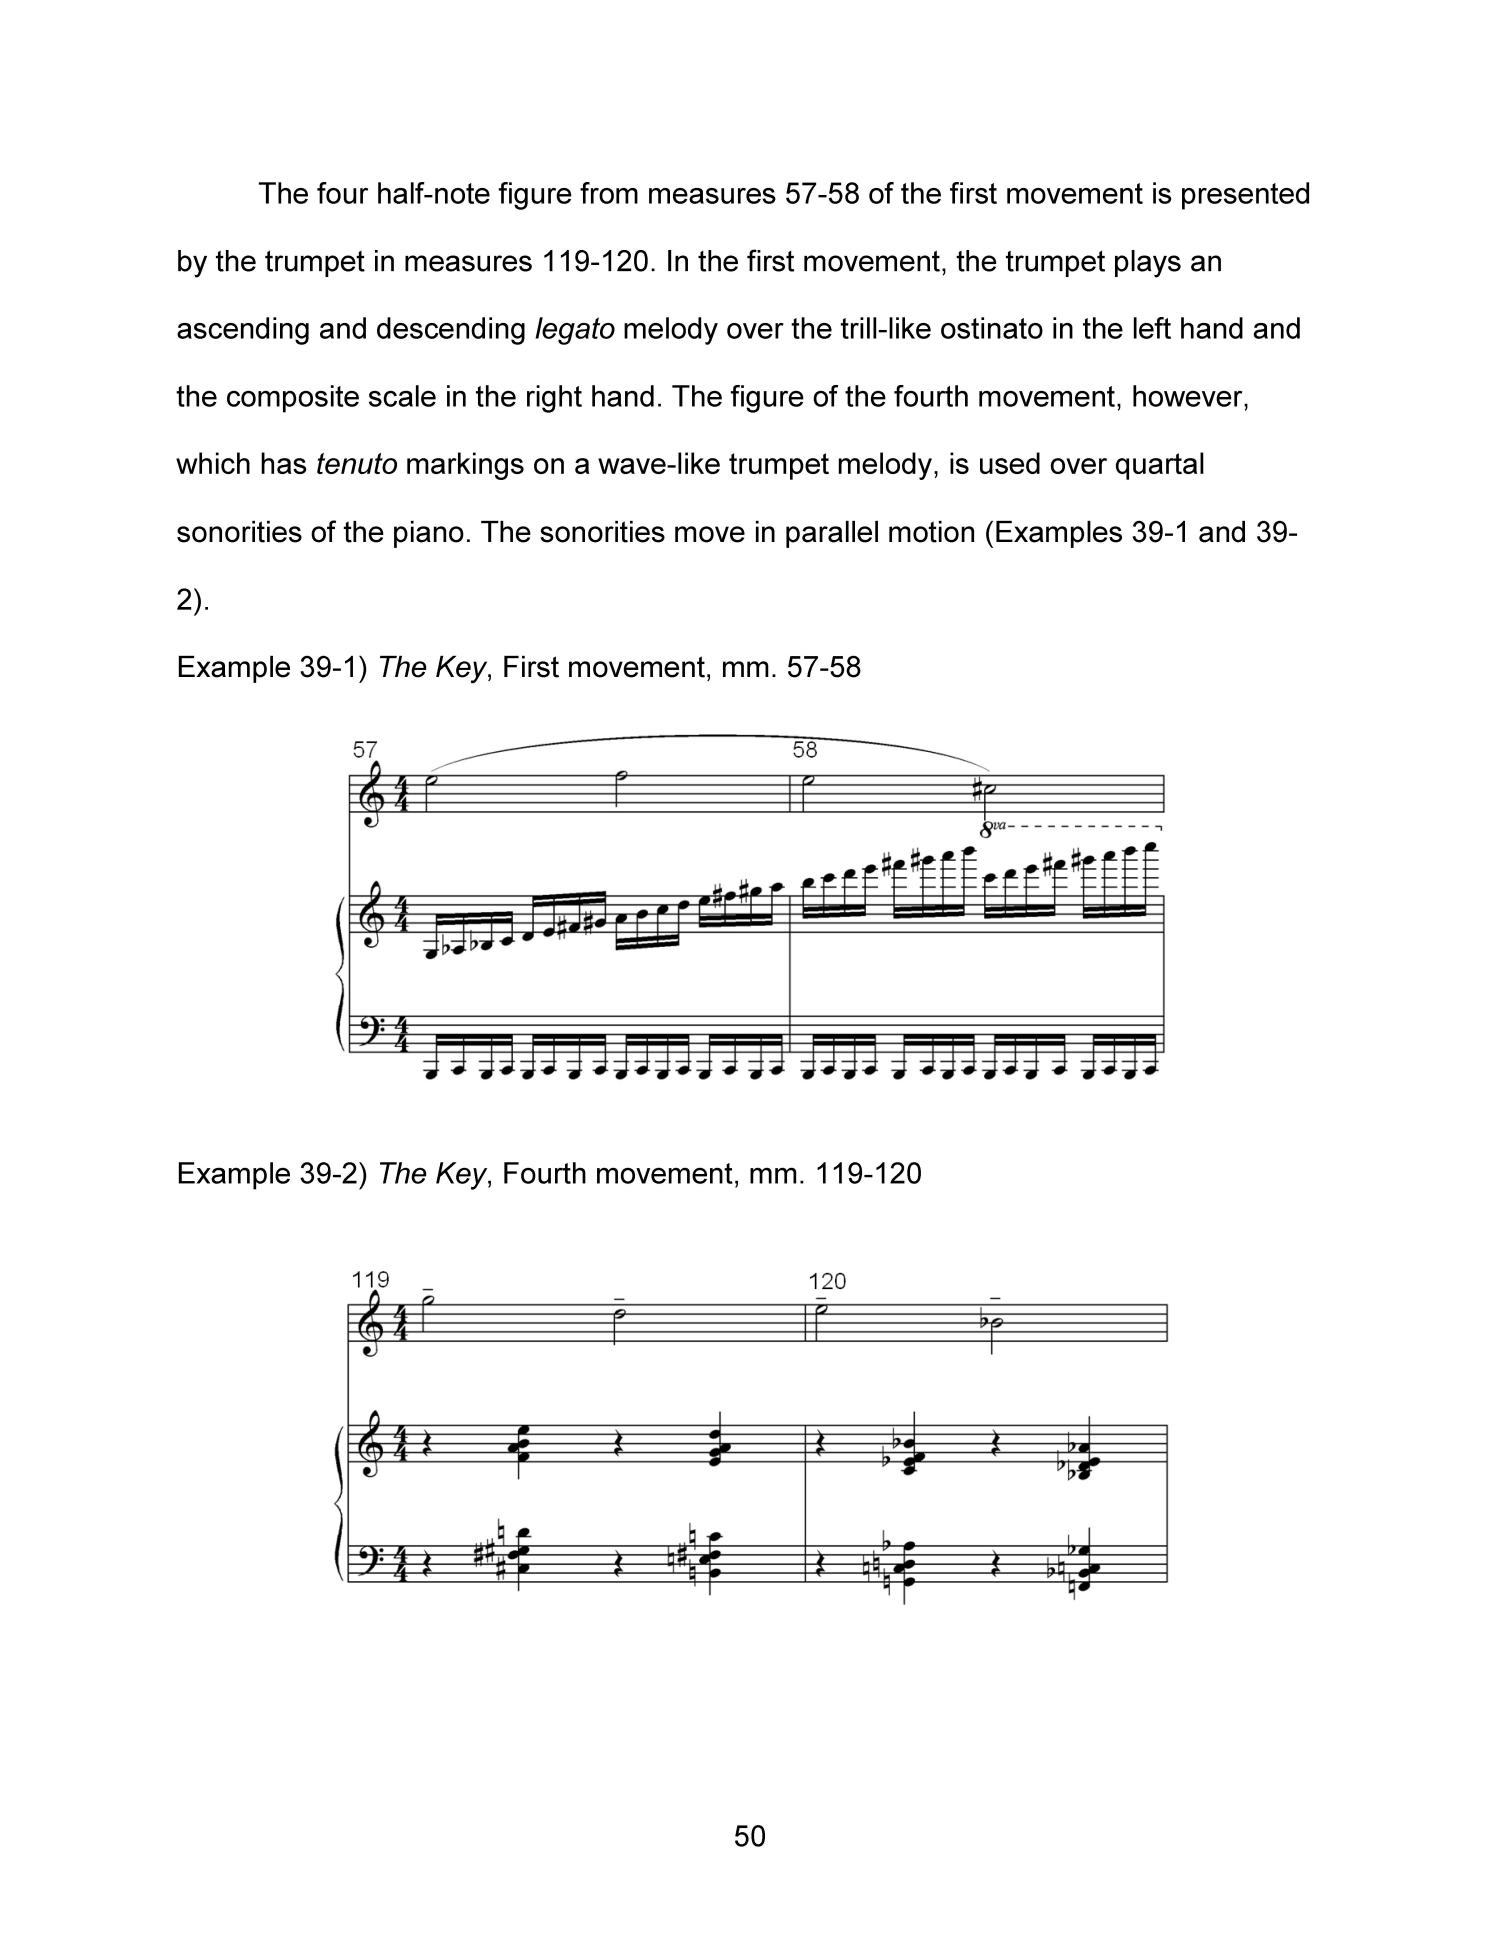 A Stylistic and Analytical Study of The Key for Trumpet and Piano by James Wintle
                                                
                                                    50
                                                